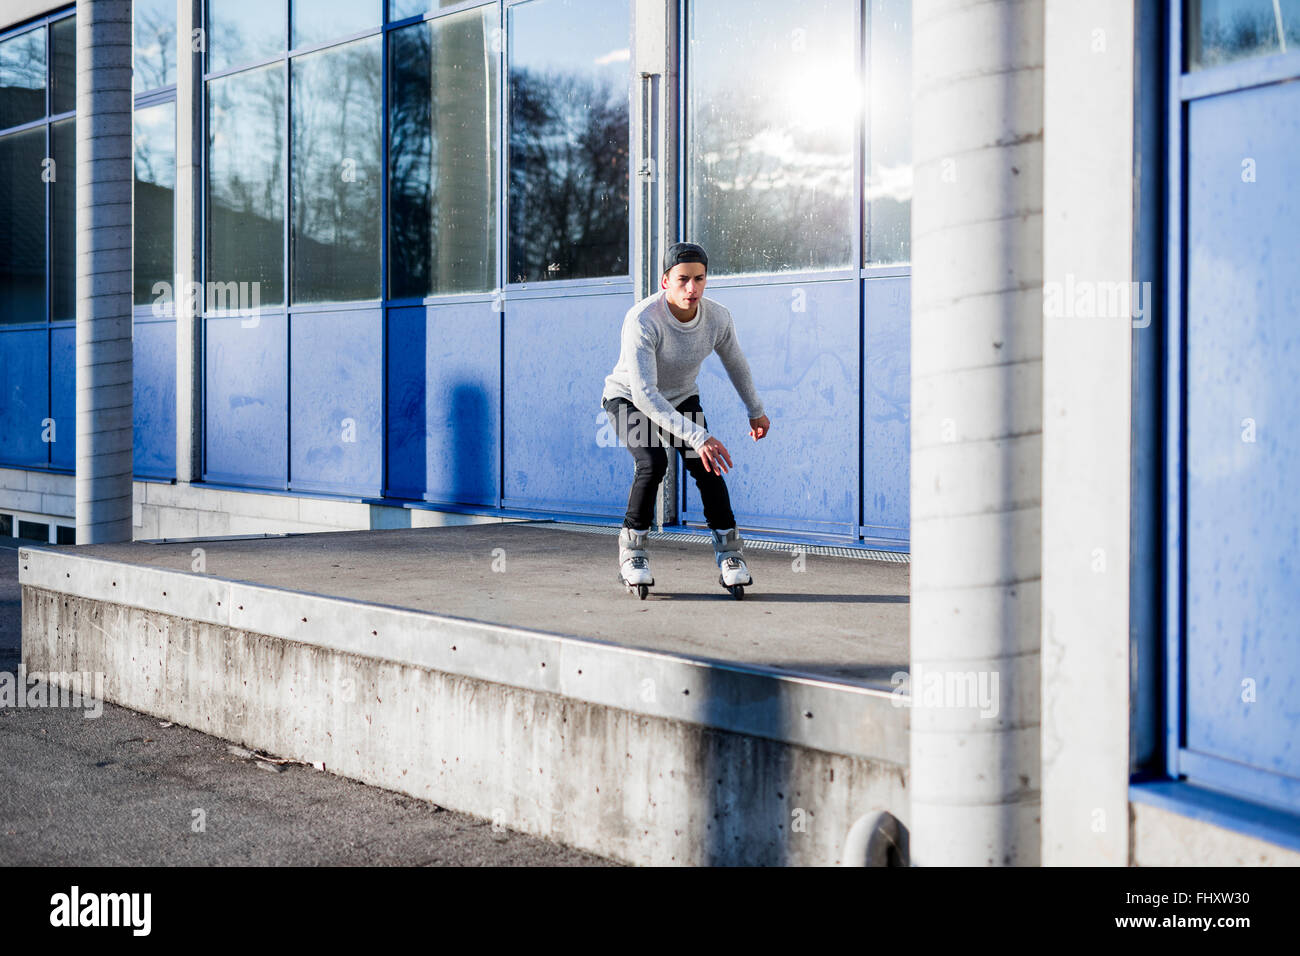 Young man inline skating along a building Stock Photo